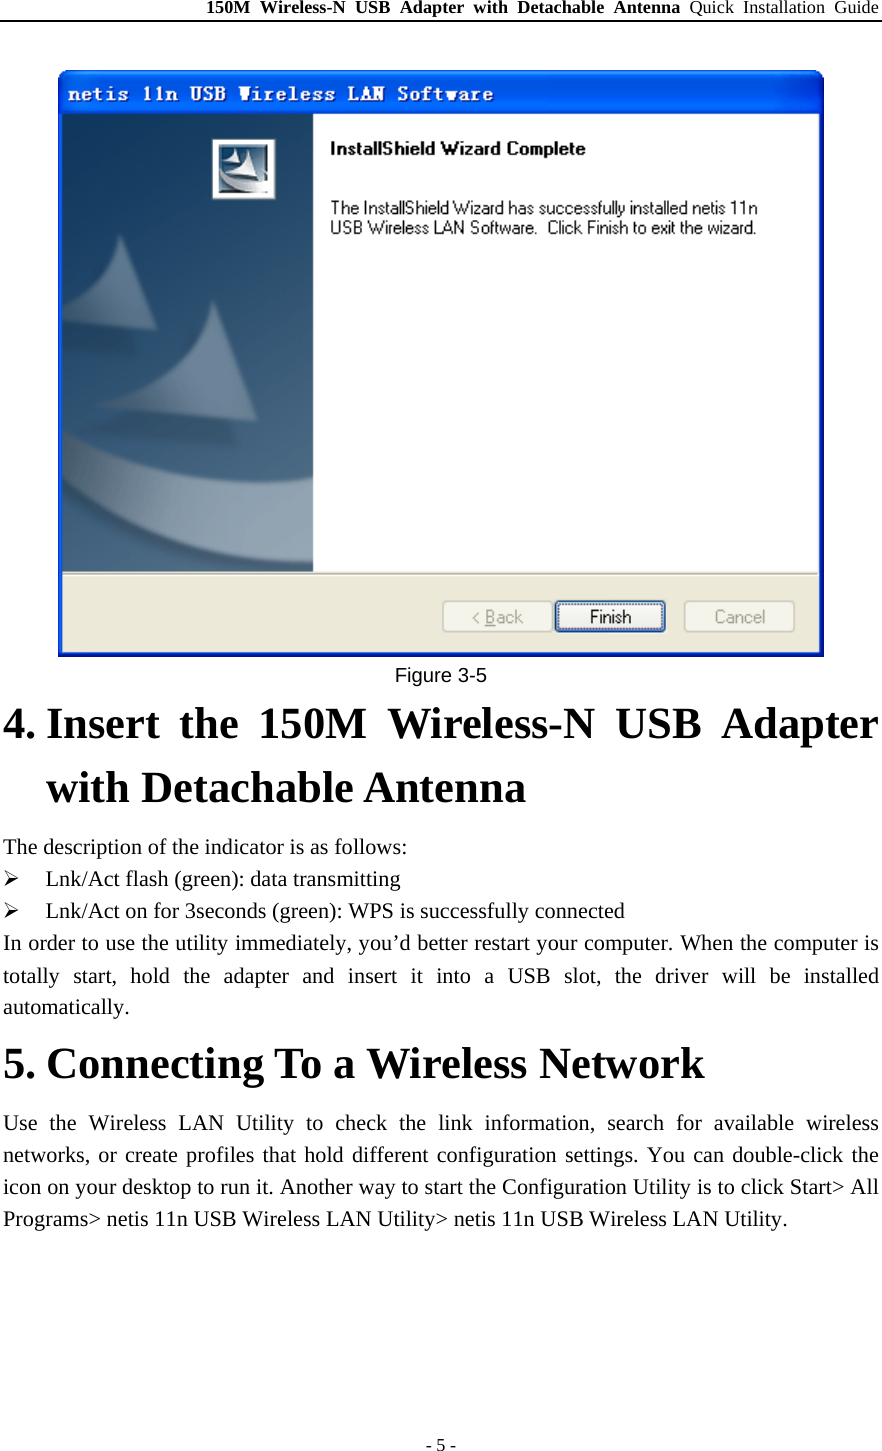 150M Wireless-N USB Adapter with Detachable Antenna Quick Installation Guide - 5 -  Figure 3-5 4. Insert the 150M Wireless-N USB Adapter with Detachable Antenna The description of the indicator is as follows: ¾ Lnk/Act flash (green): data transmitting ¾ Lnk/Act on for 3seconds (green): WPS is successfully connected In order to use the utility immediately, you’d better restart your computer. When the computer is totally start, hold the adapter and insert it into a USB slot, the driver will be installed automatically. 5. Connecting To a Wireless Network Use the Wireless LAN Utility to check the link information, search for available wireless networks, or create profiles that hold different configuration settings. You can double-click the icon on your desktop to run it. Another way to start the Configuration Utility is to click Start&gt; All Programs&gt; netis 11n USB Wireless LAN Utility&gt; netis 11n USB Wireless LAN Utility. 